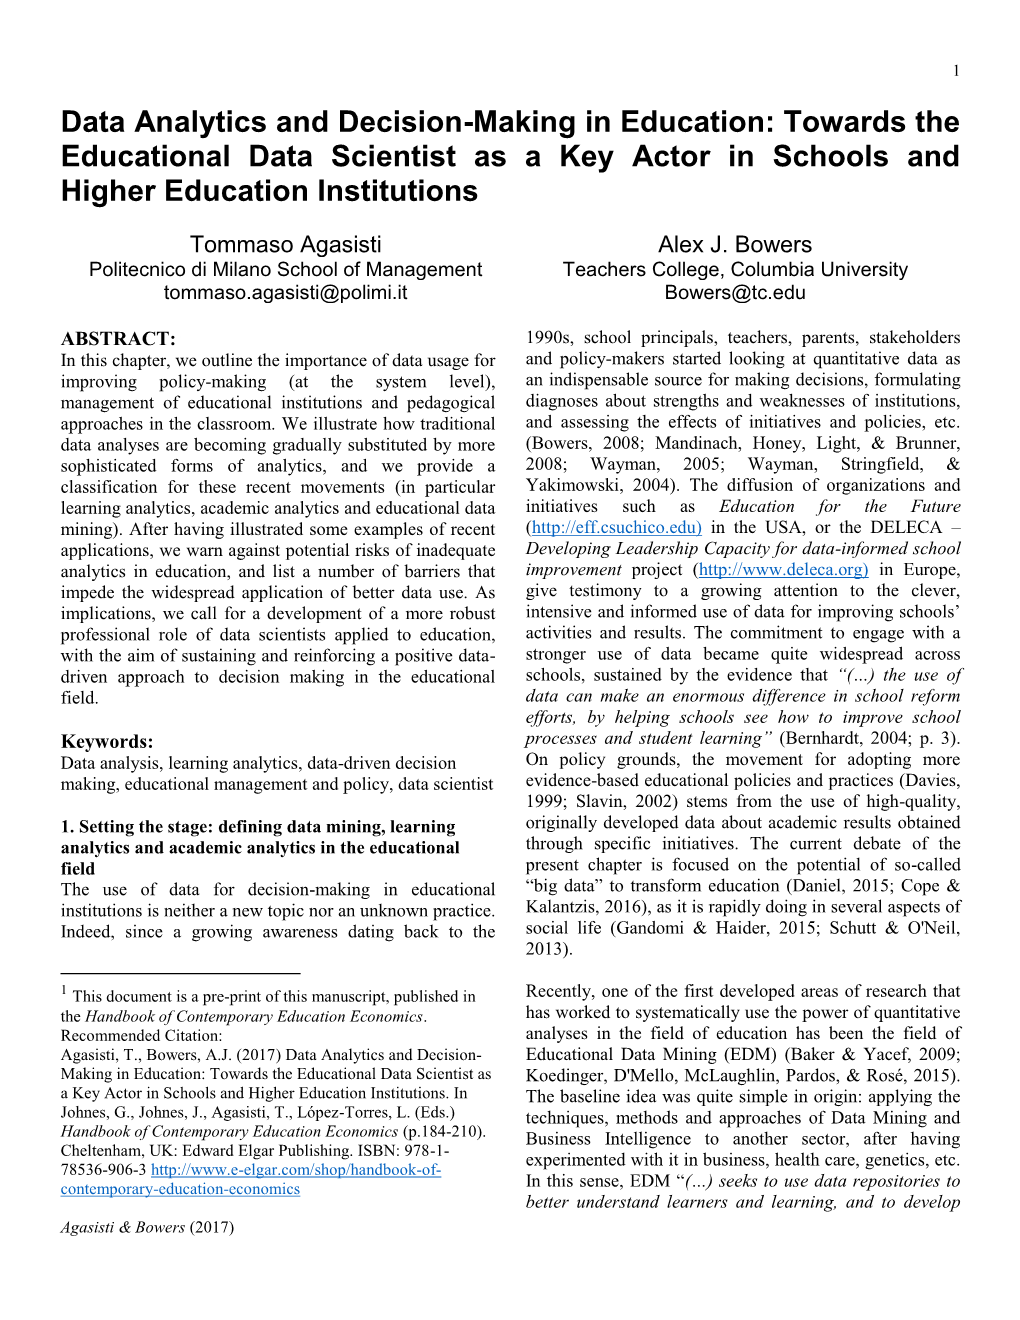 Data Analytics and Decision-Making in Education: Towards the Educational Data Scientist As a Key Actor in Schools and Higher Education Institutions